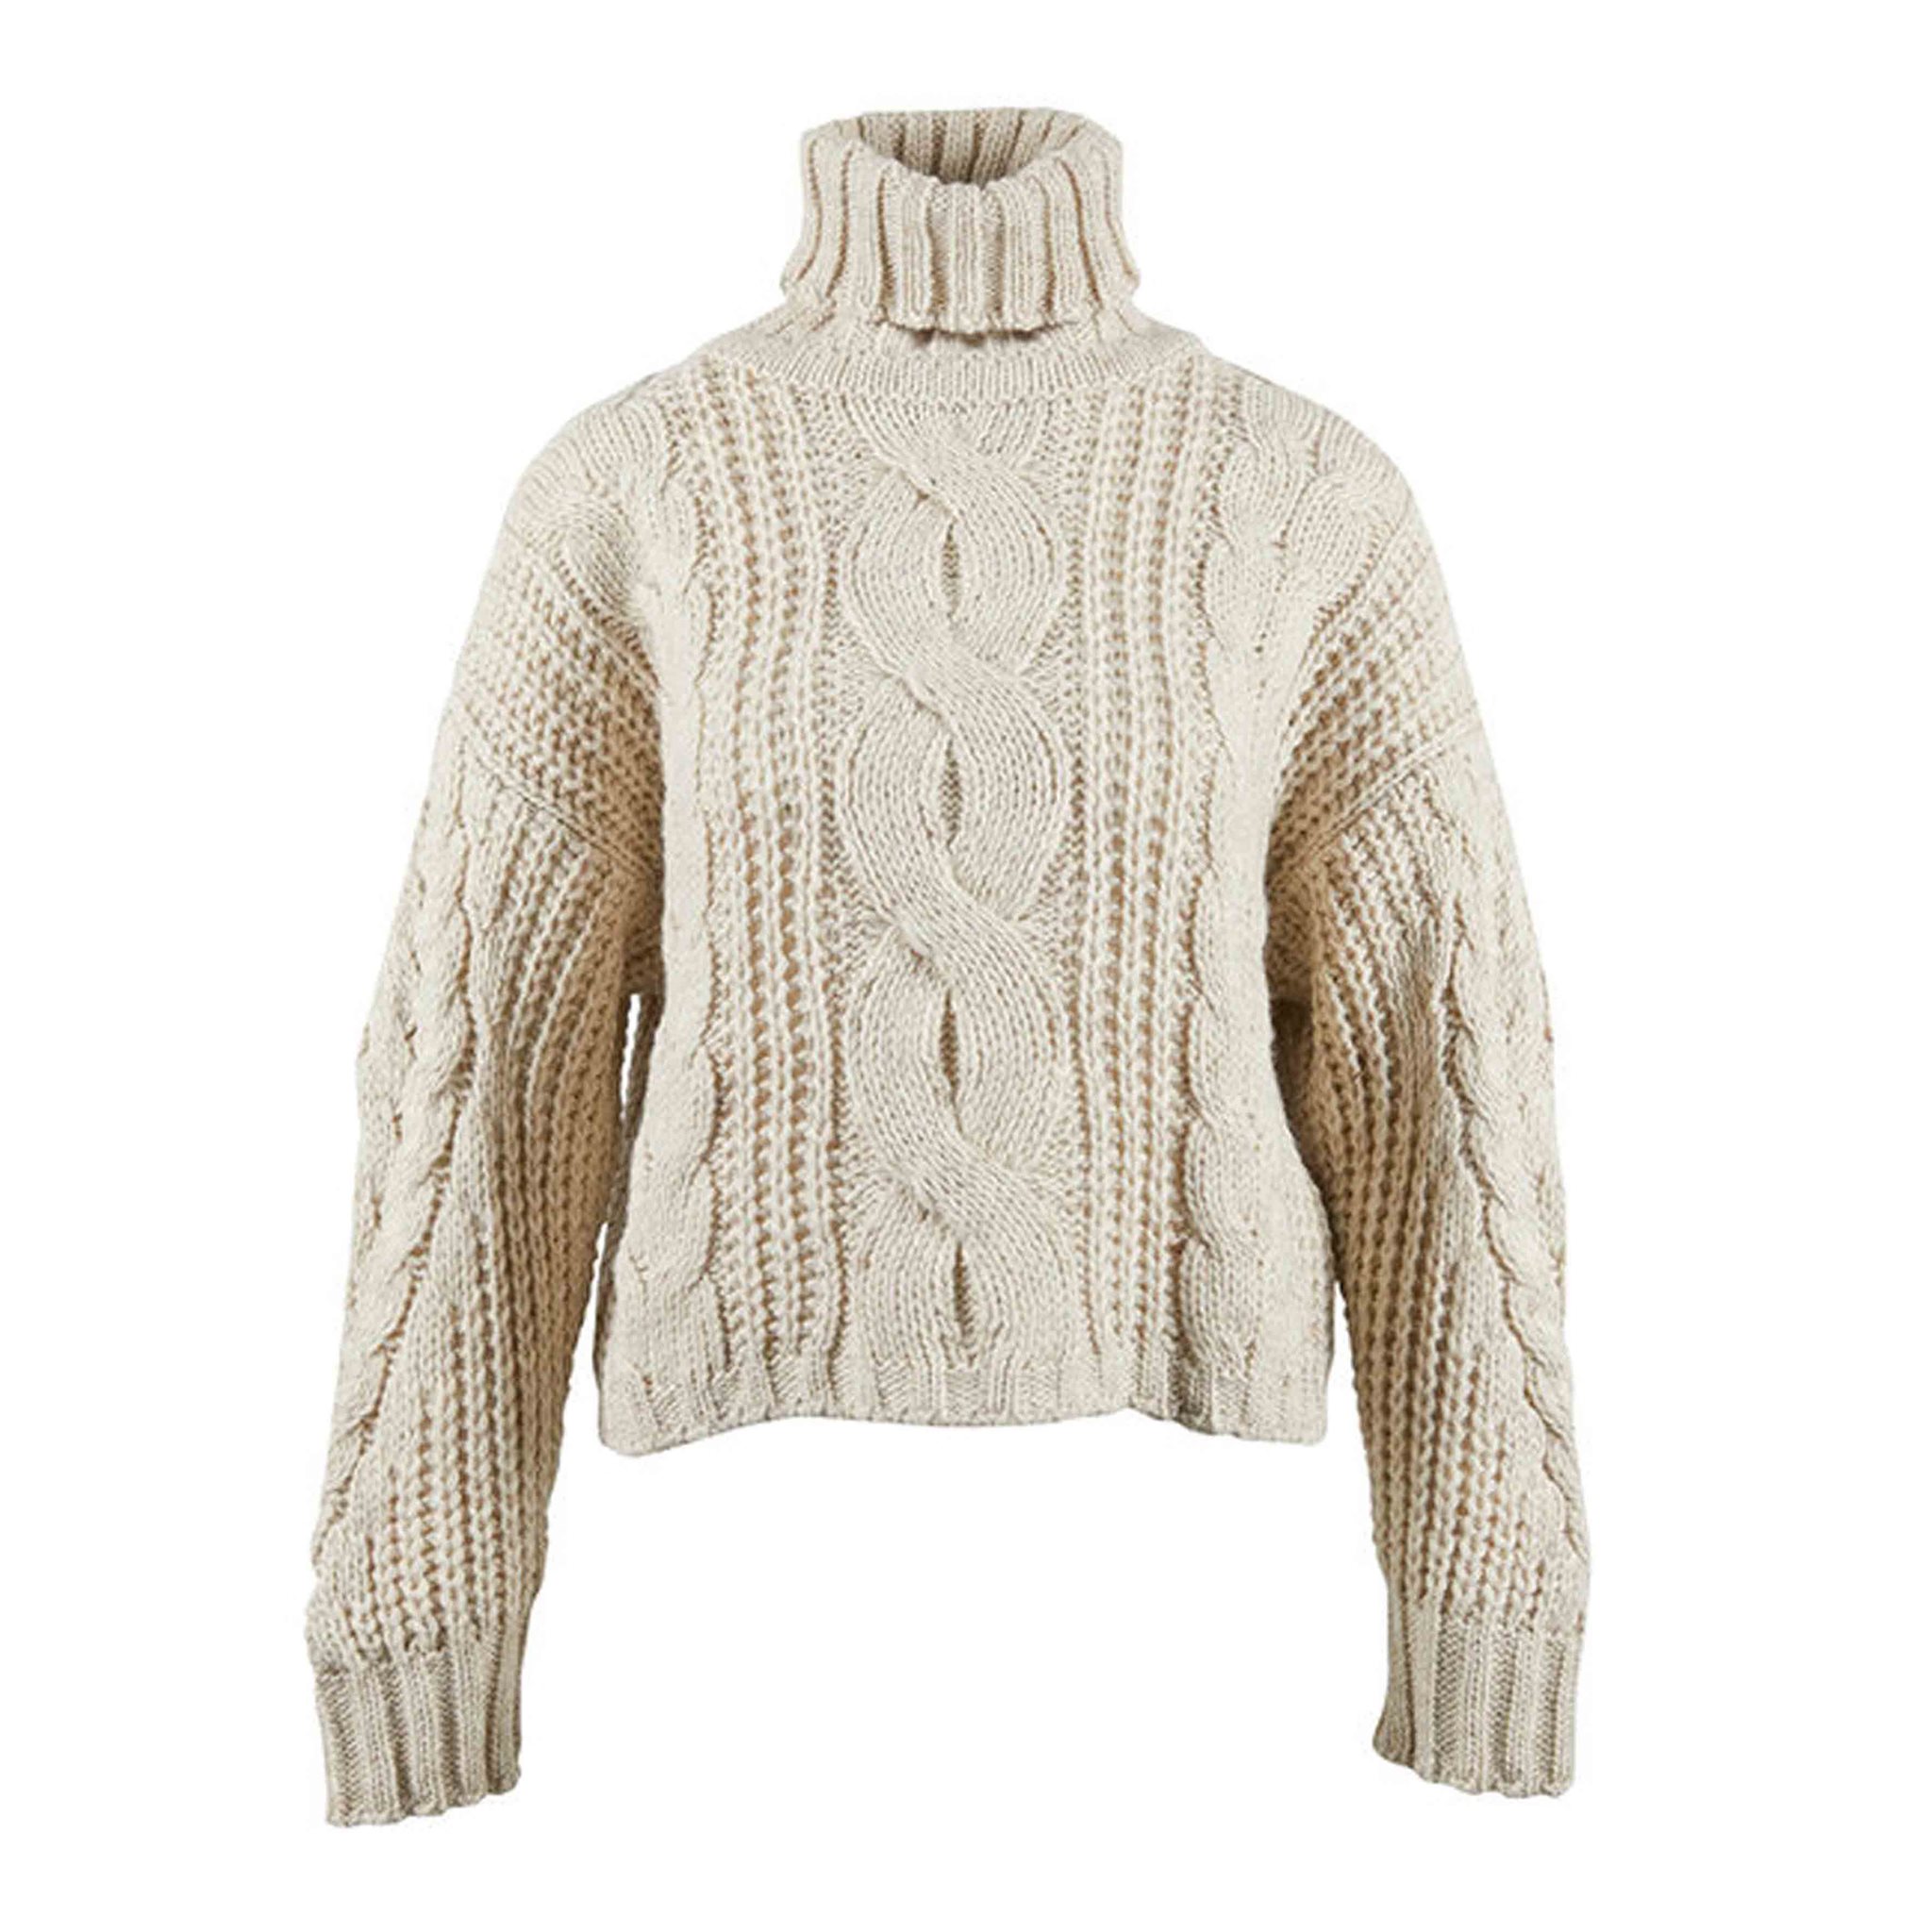 ROLL NECK CABLE SWT RIVERWOODS WOMAN